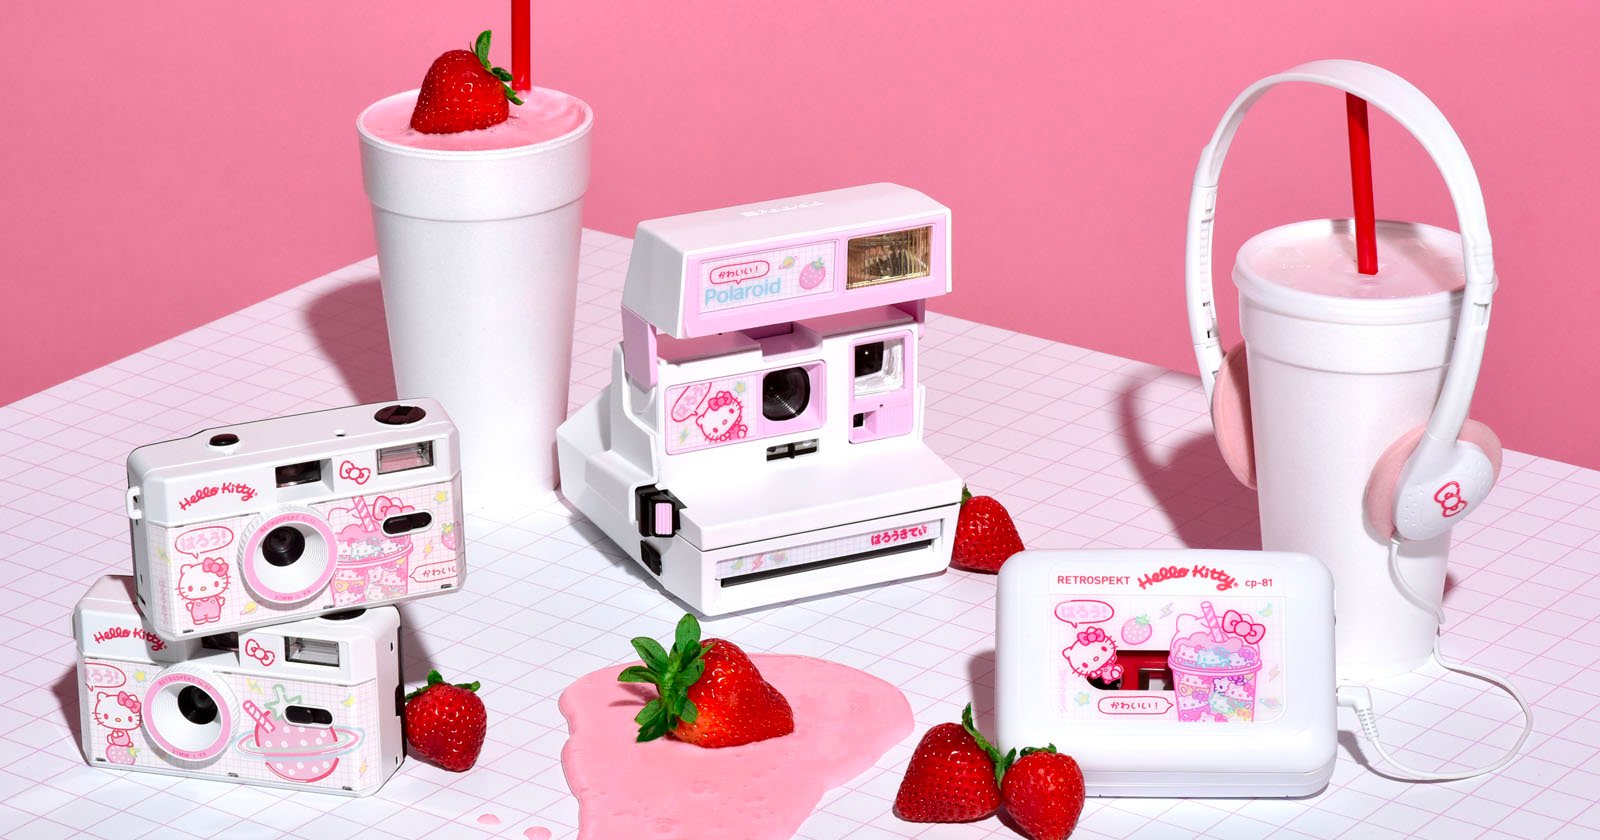 This New Polaroid x Hello Kitty Mashup is an Overload of Cuteness